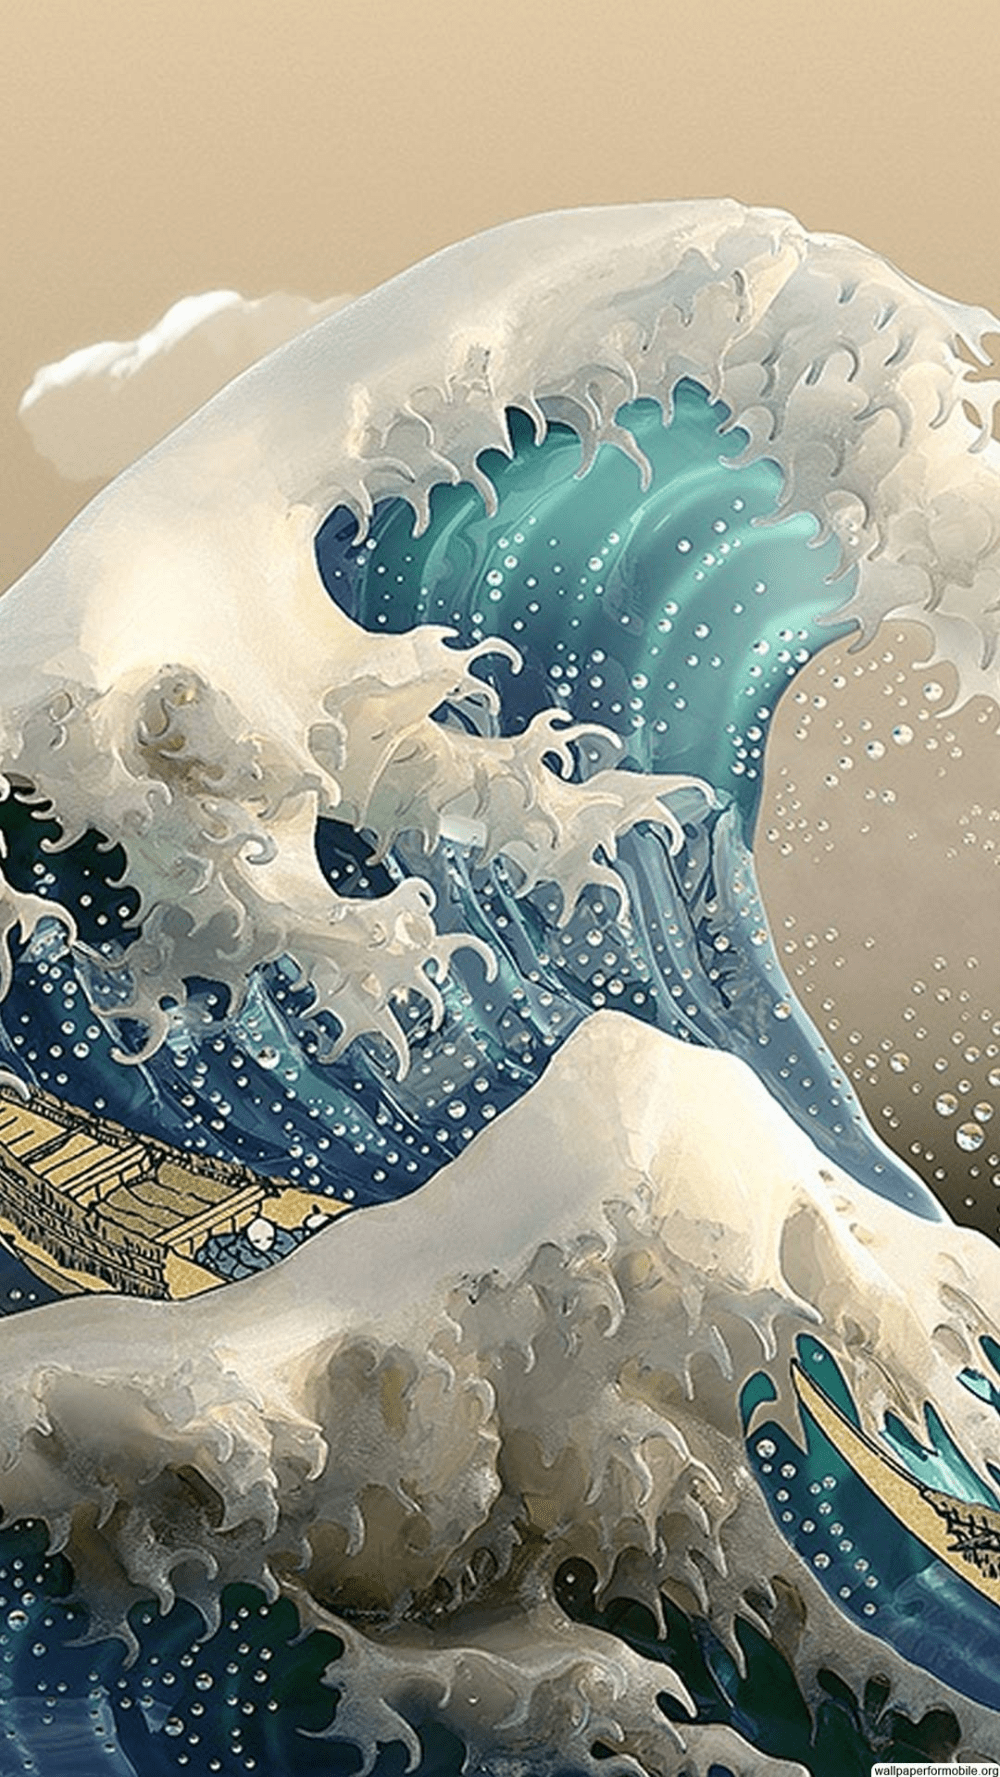 A painting of the great wave off japan - The Great Wave off Kanagawa, 3D, wave